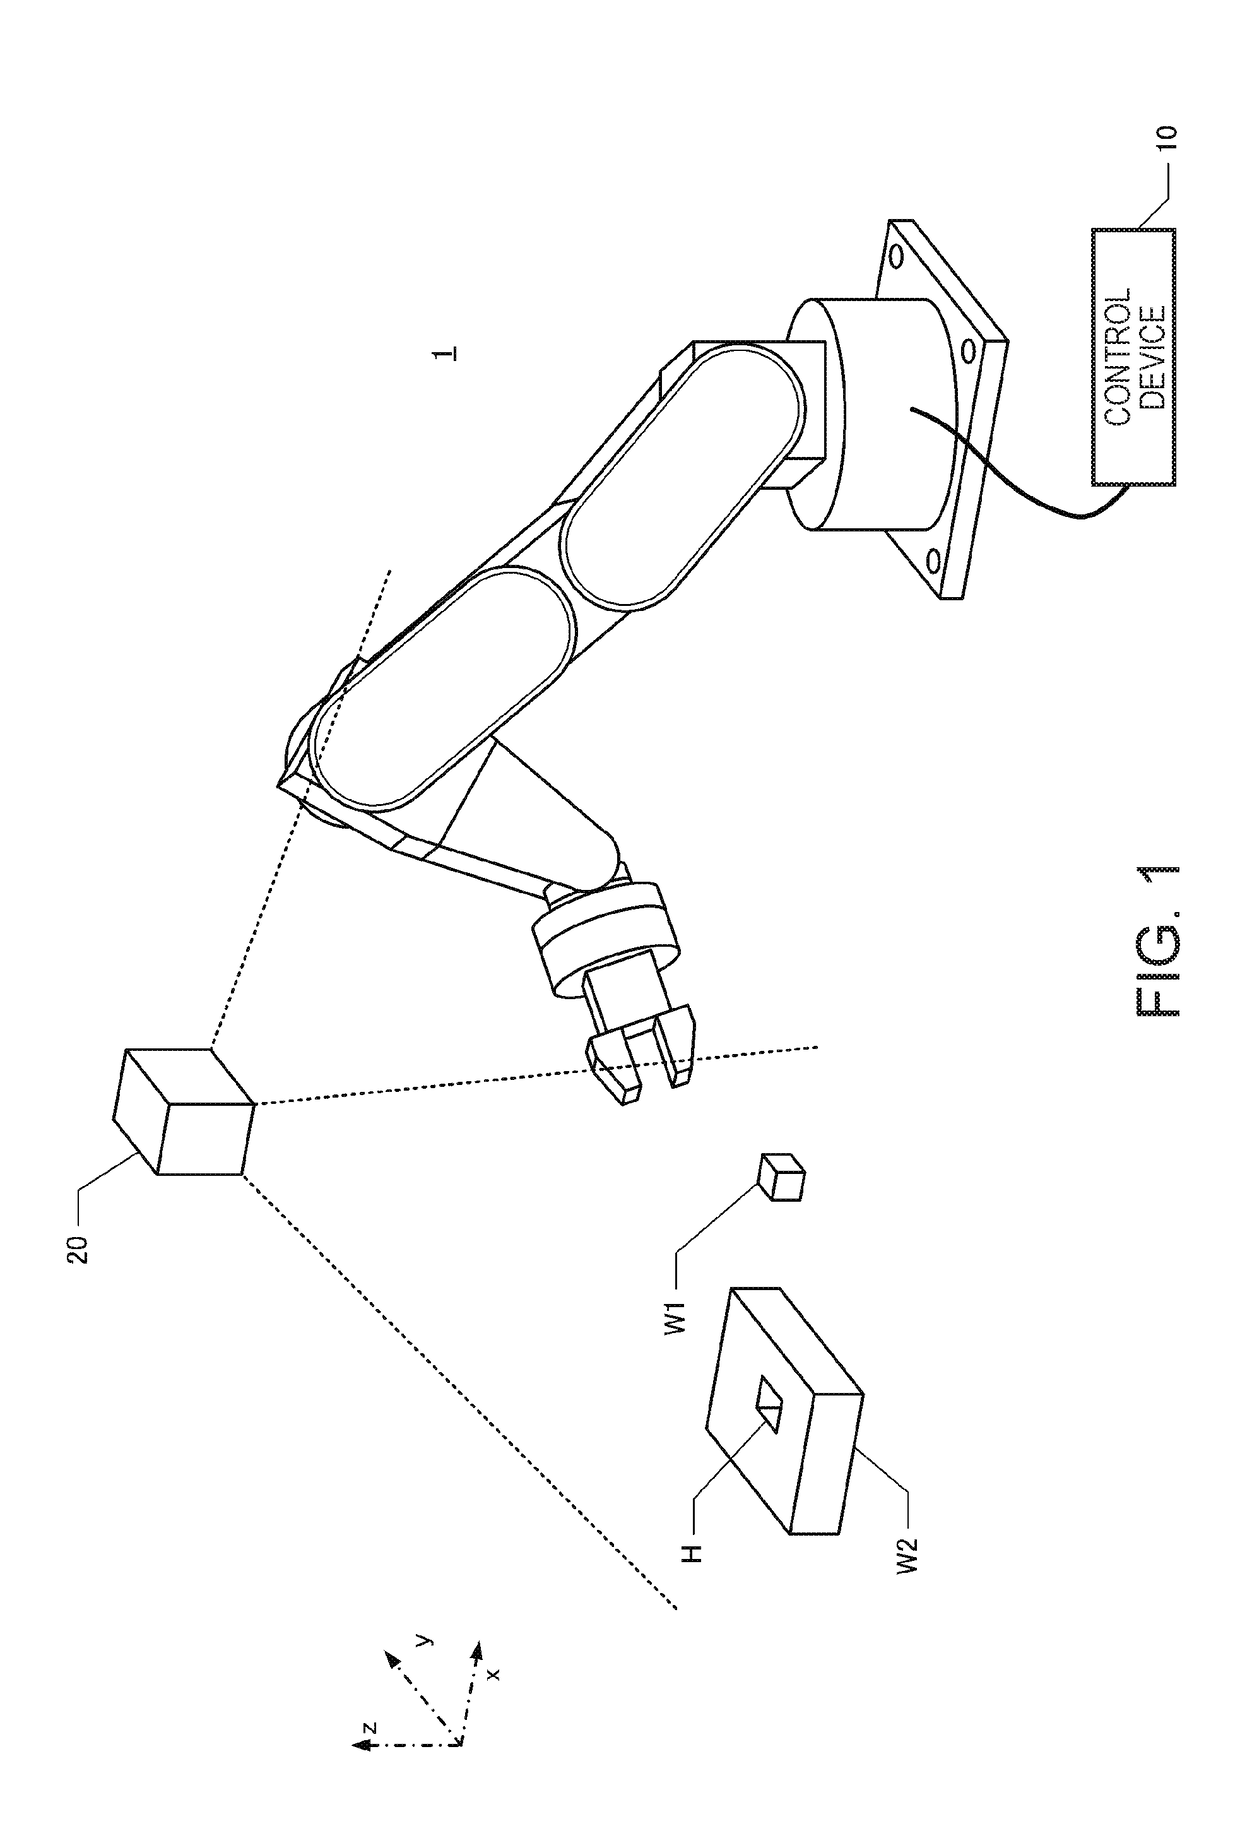 Object attitude detection device, control device, and robot system